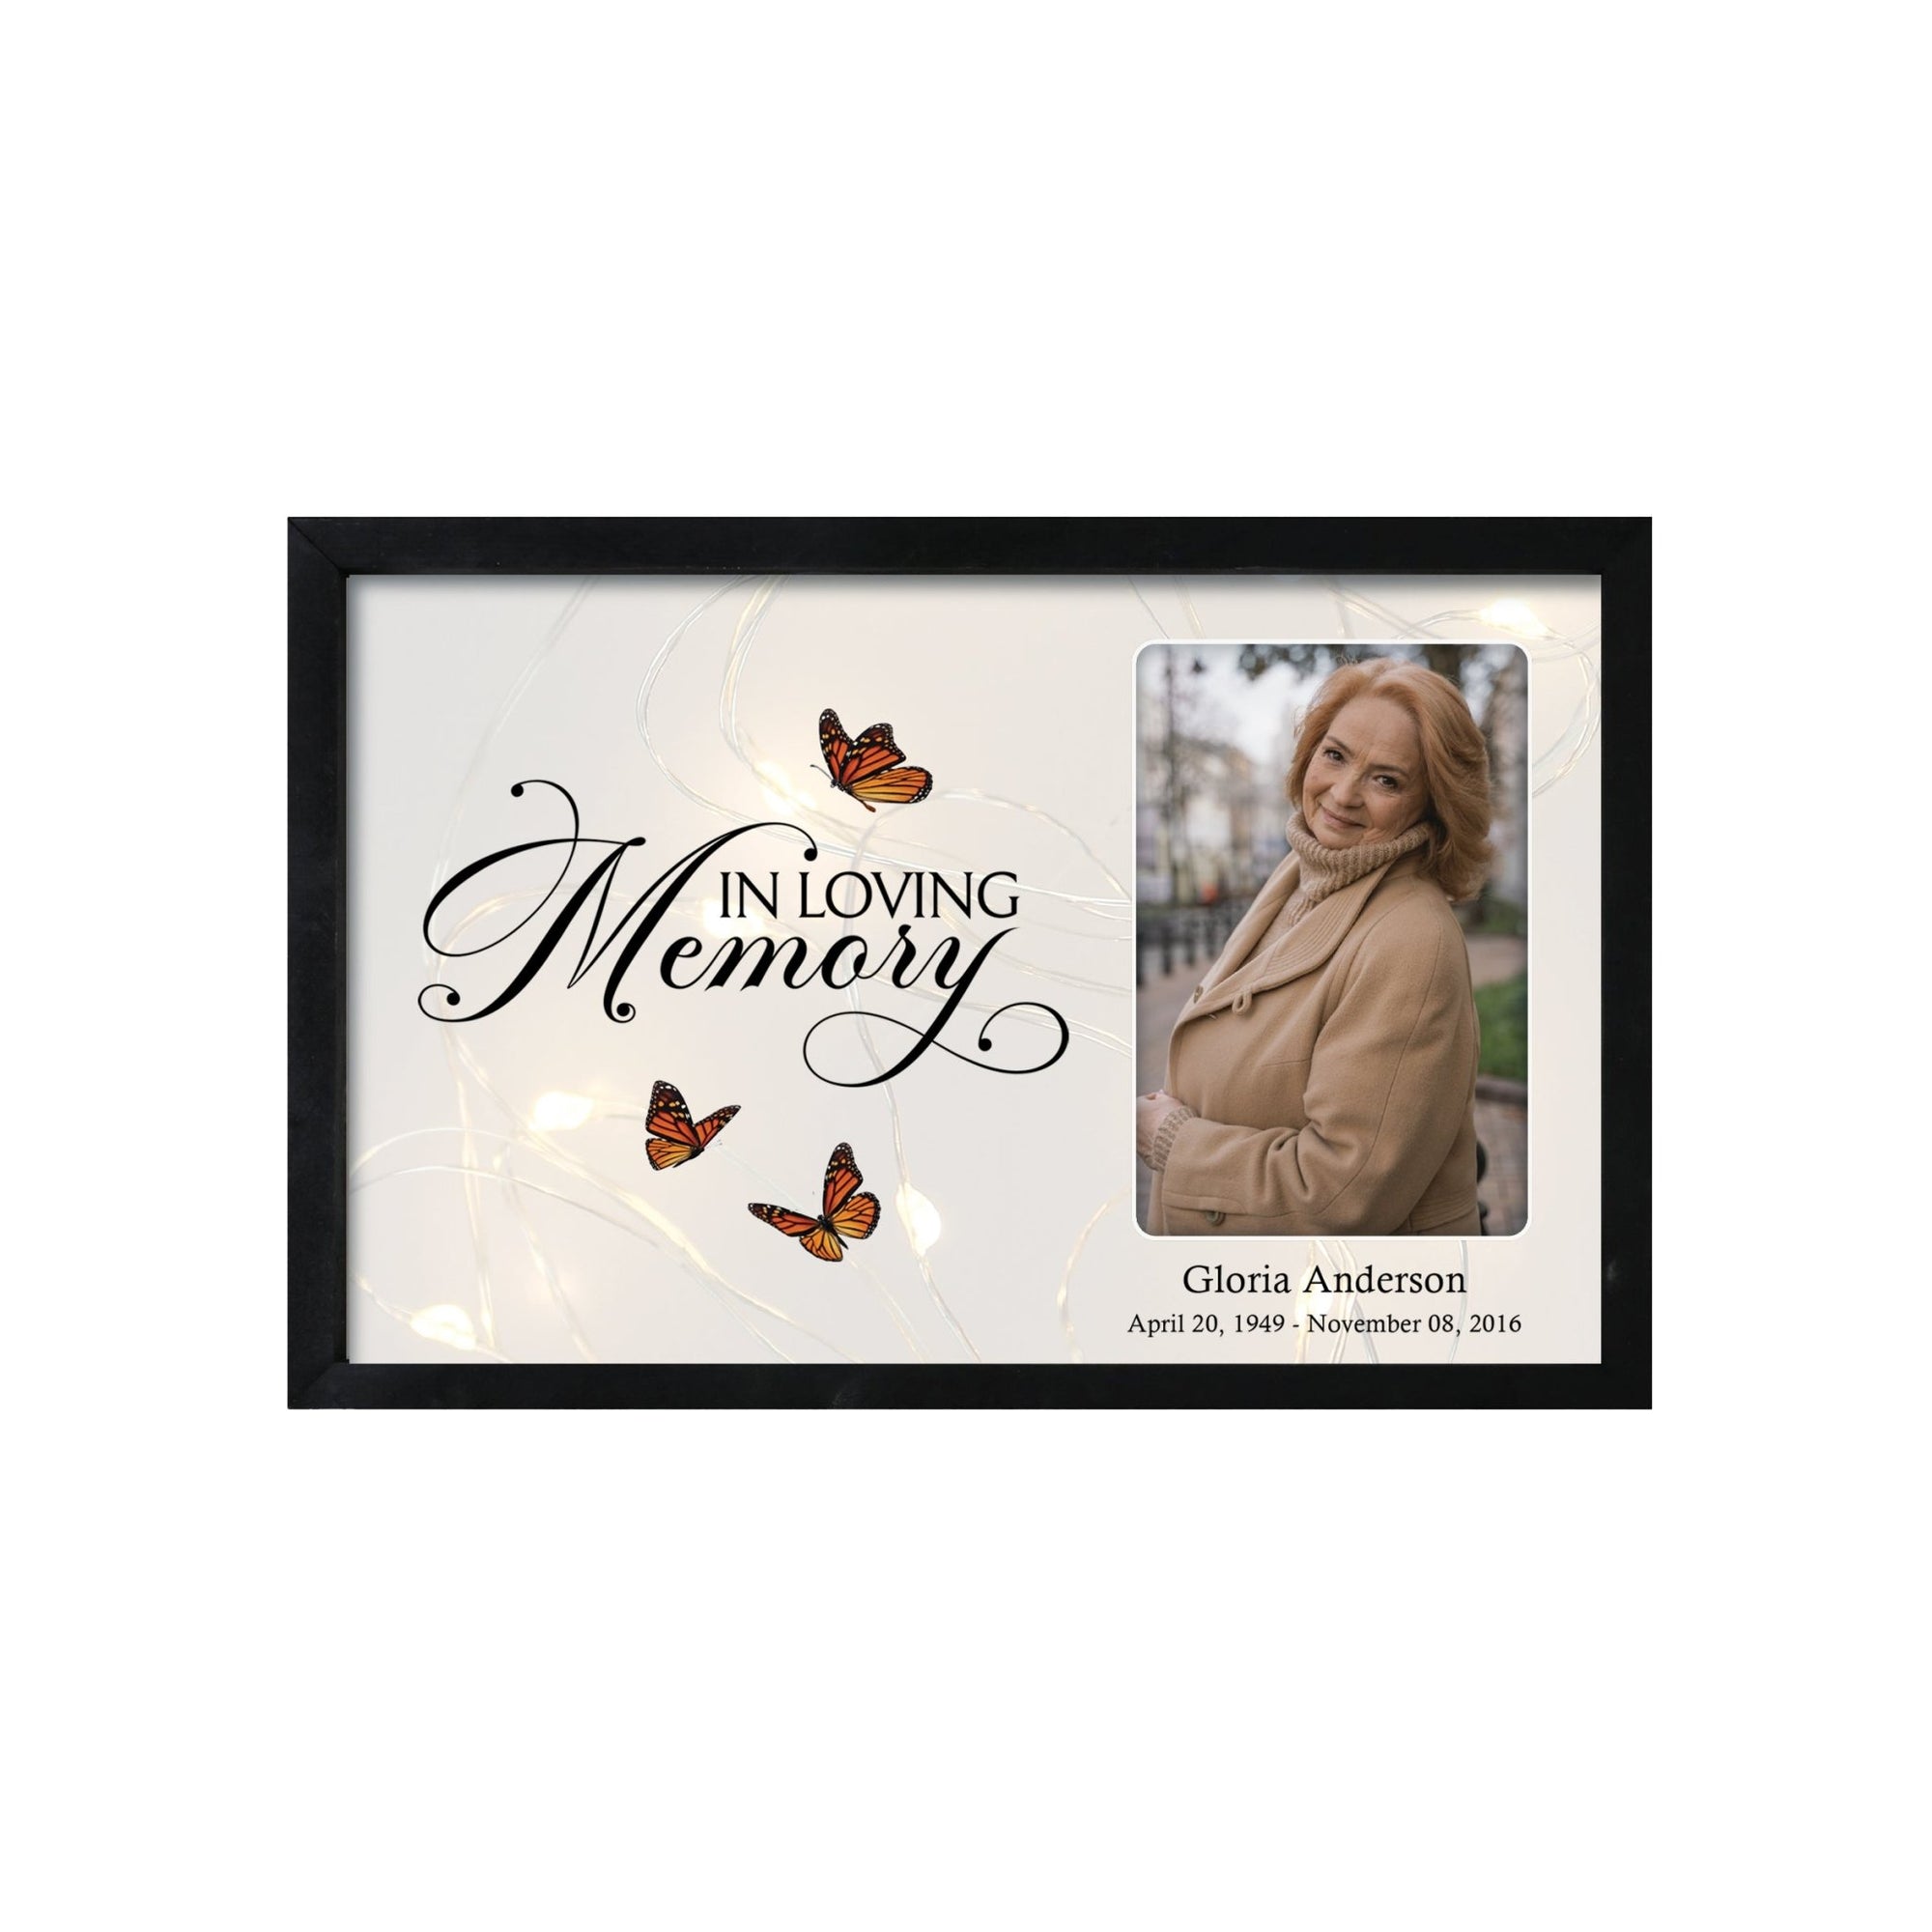 Personalized Memorial Black Framed Shadow Box With Lights Sympathy Gift Wall Décor - In Loving Memory - LifeSong Milestones